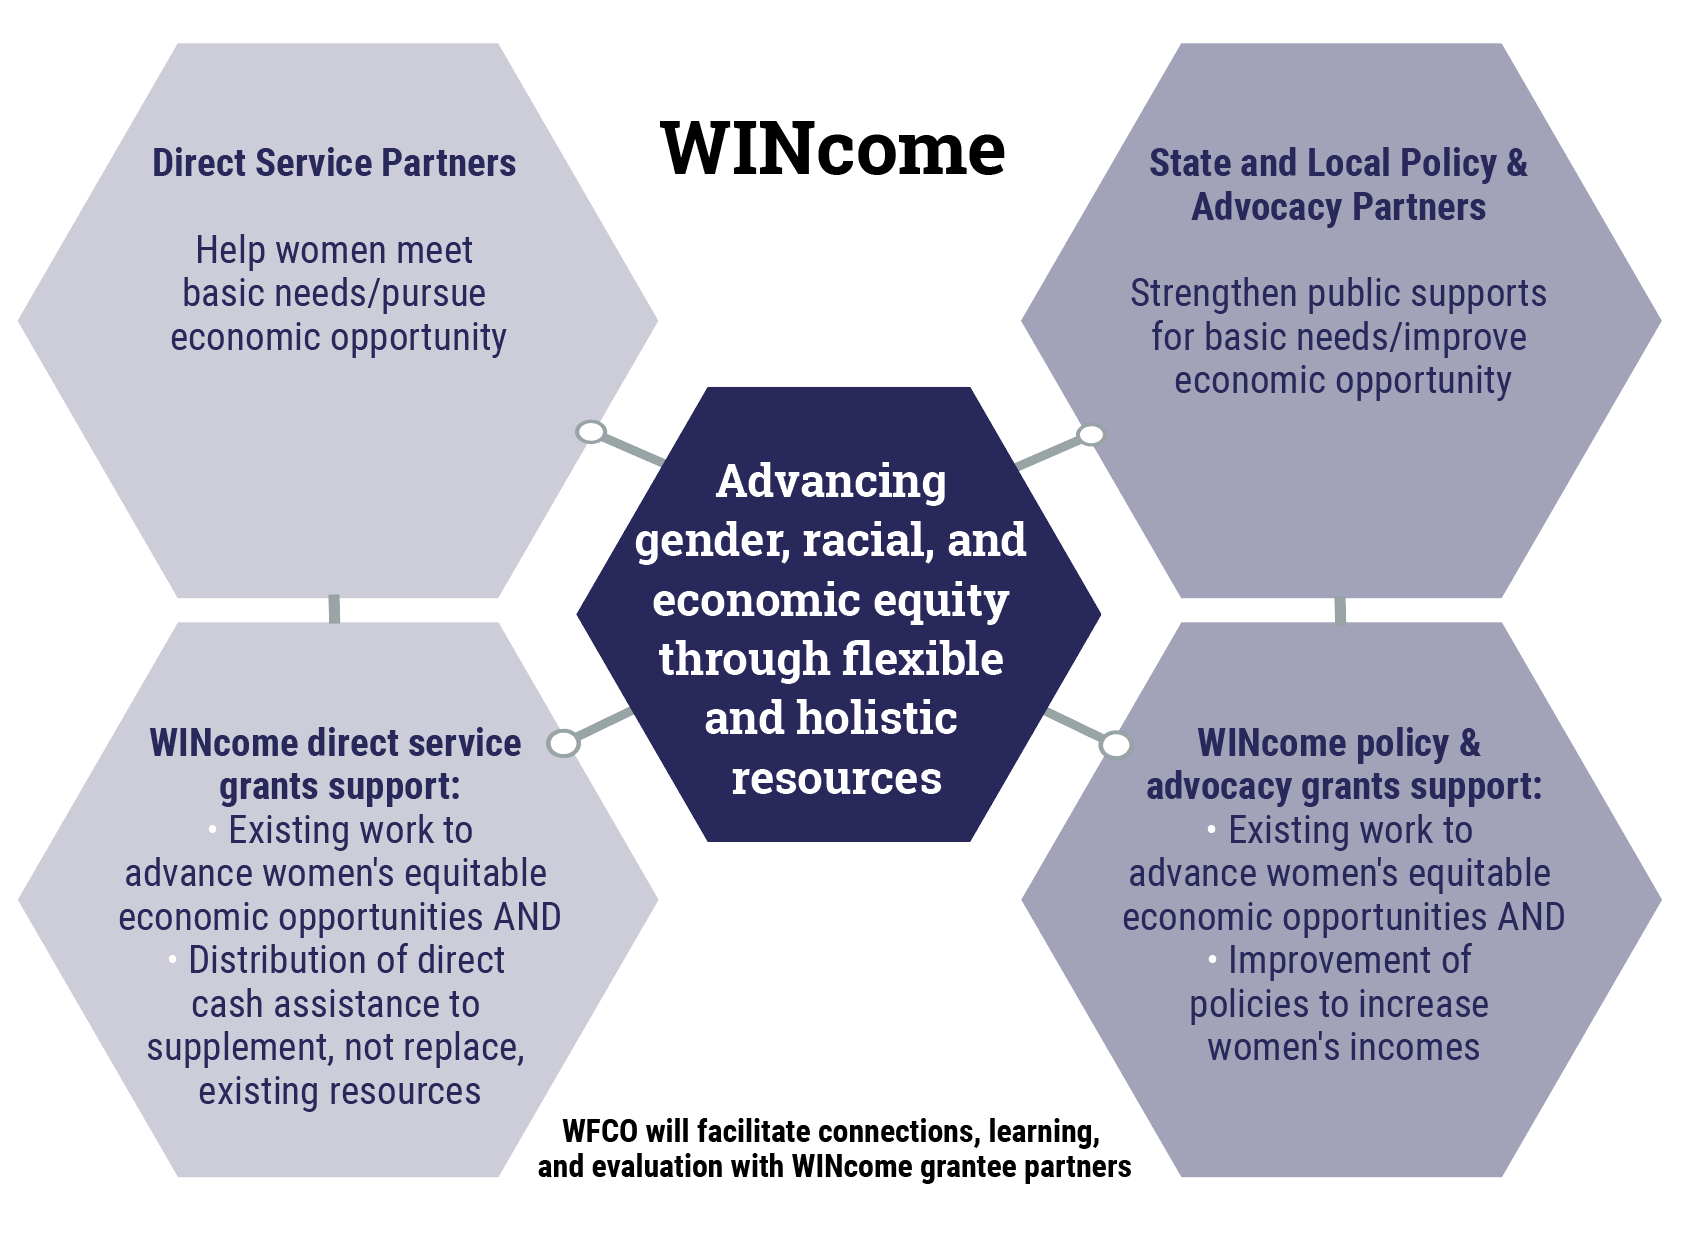 WINcome honeycomb chart explaining how WINcome will work to advance gender, racial, and economic equity through flexible and holistic resources